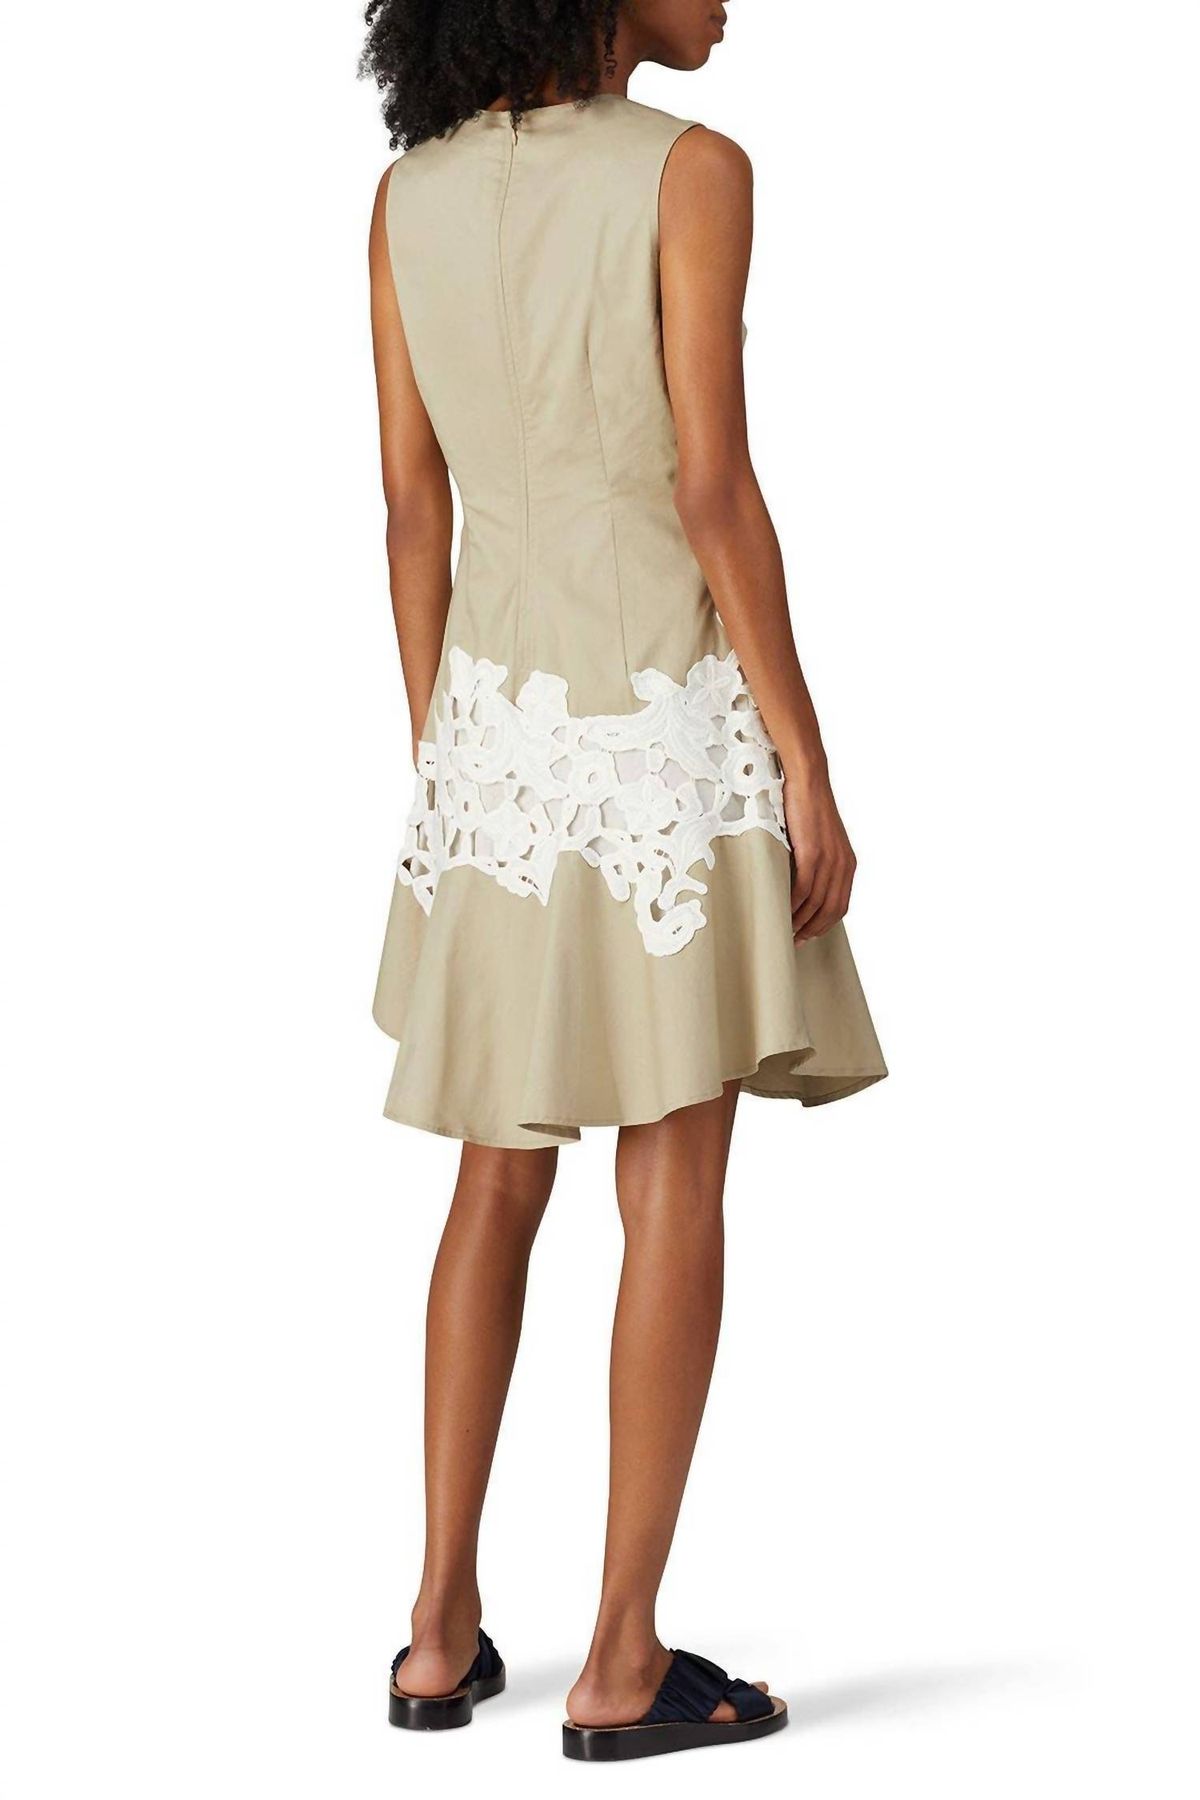 Style 1-3036452524-1615-1 Derek Lam 10 Crosby Plus Size 44 Lace Nude Cocktail Dress on Queenly